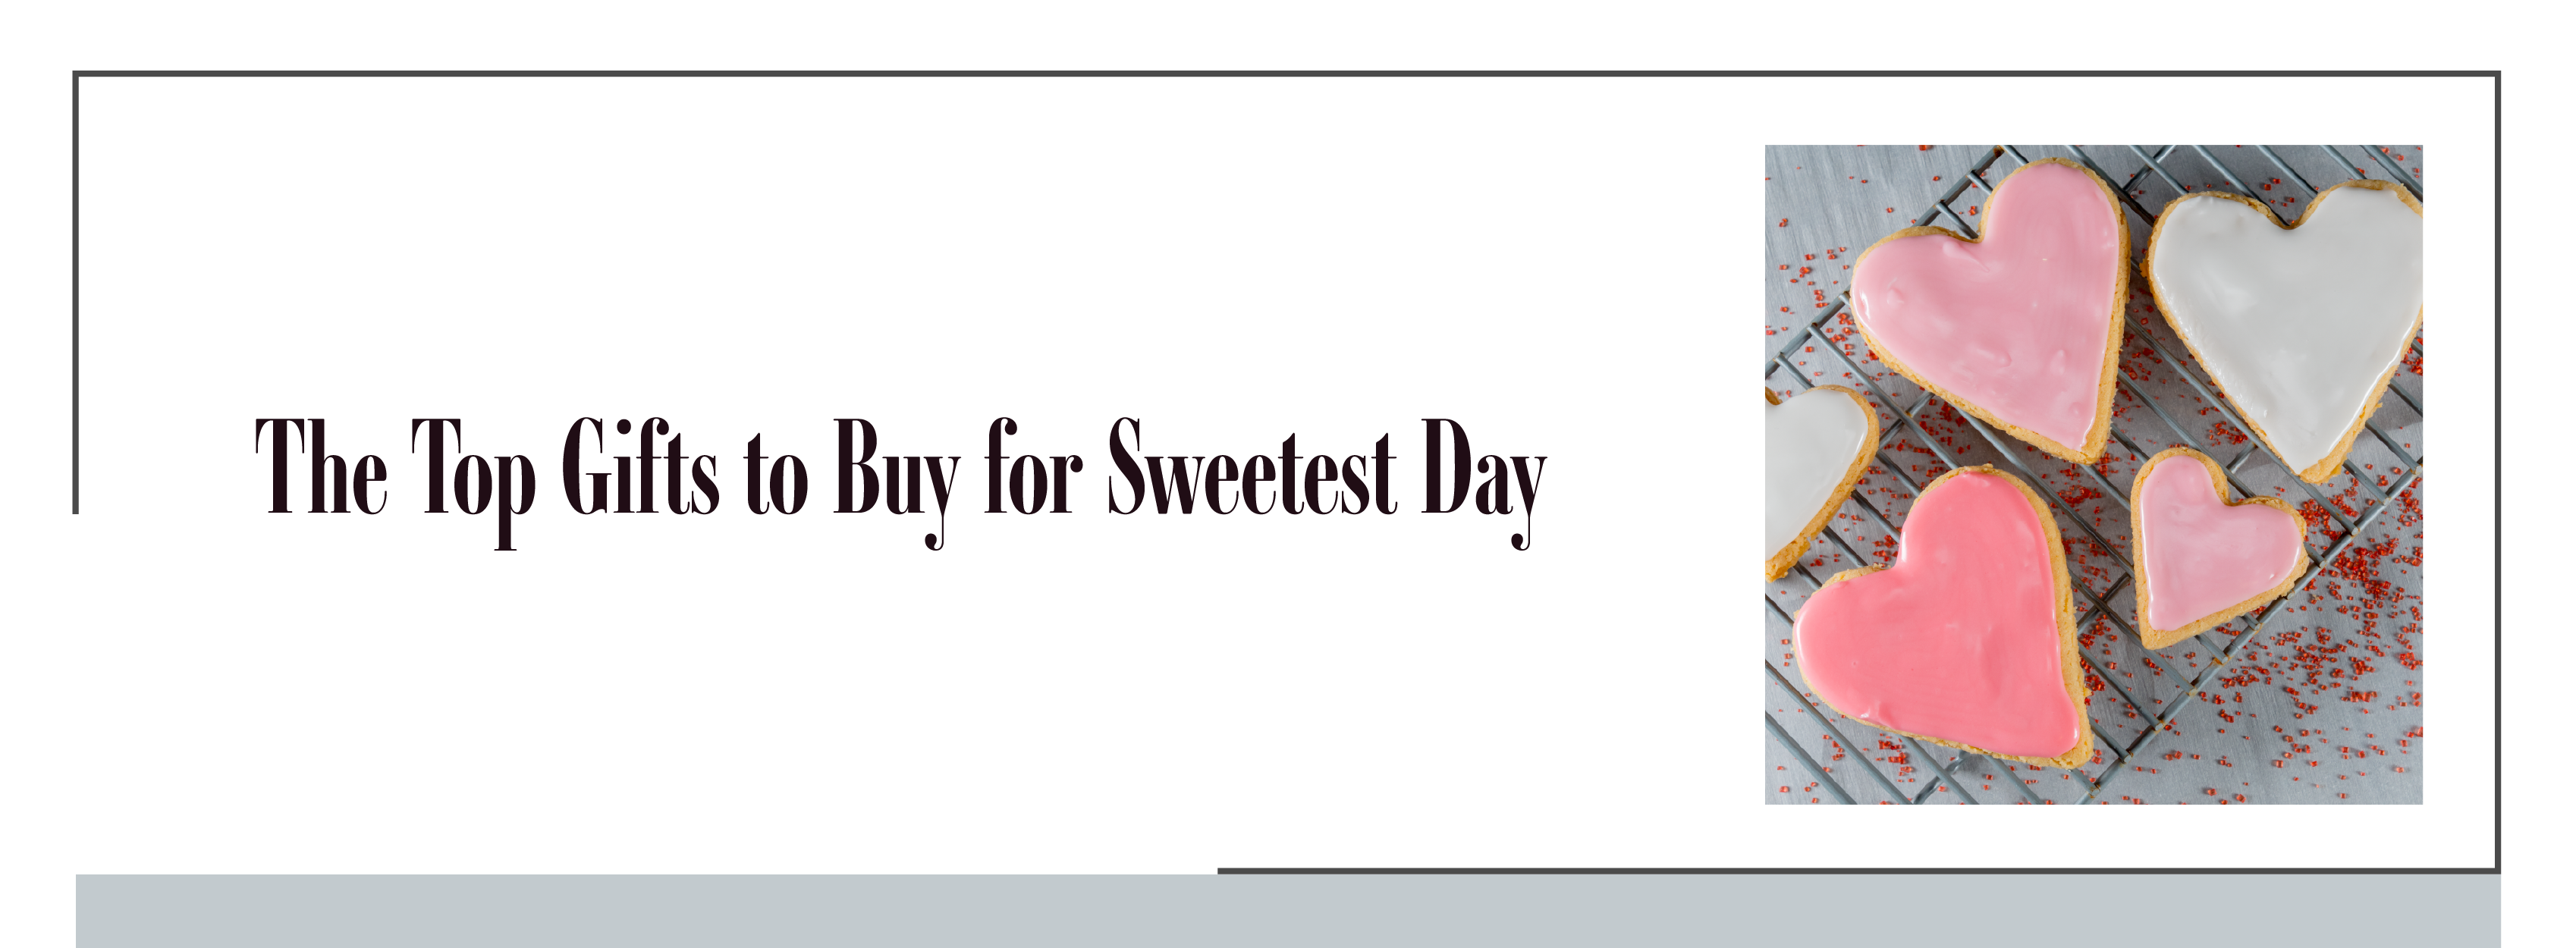 https://www.odealarose.com/blog/wp-content/uploads/2022/08/01-top-gifts-for-sweetest-day.png